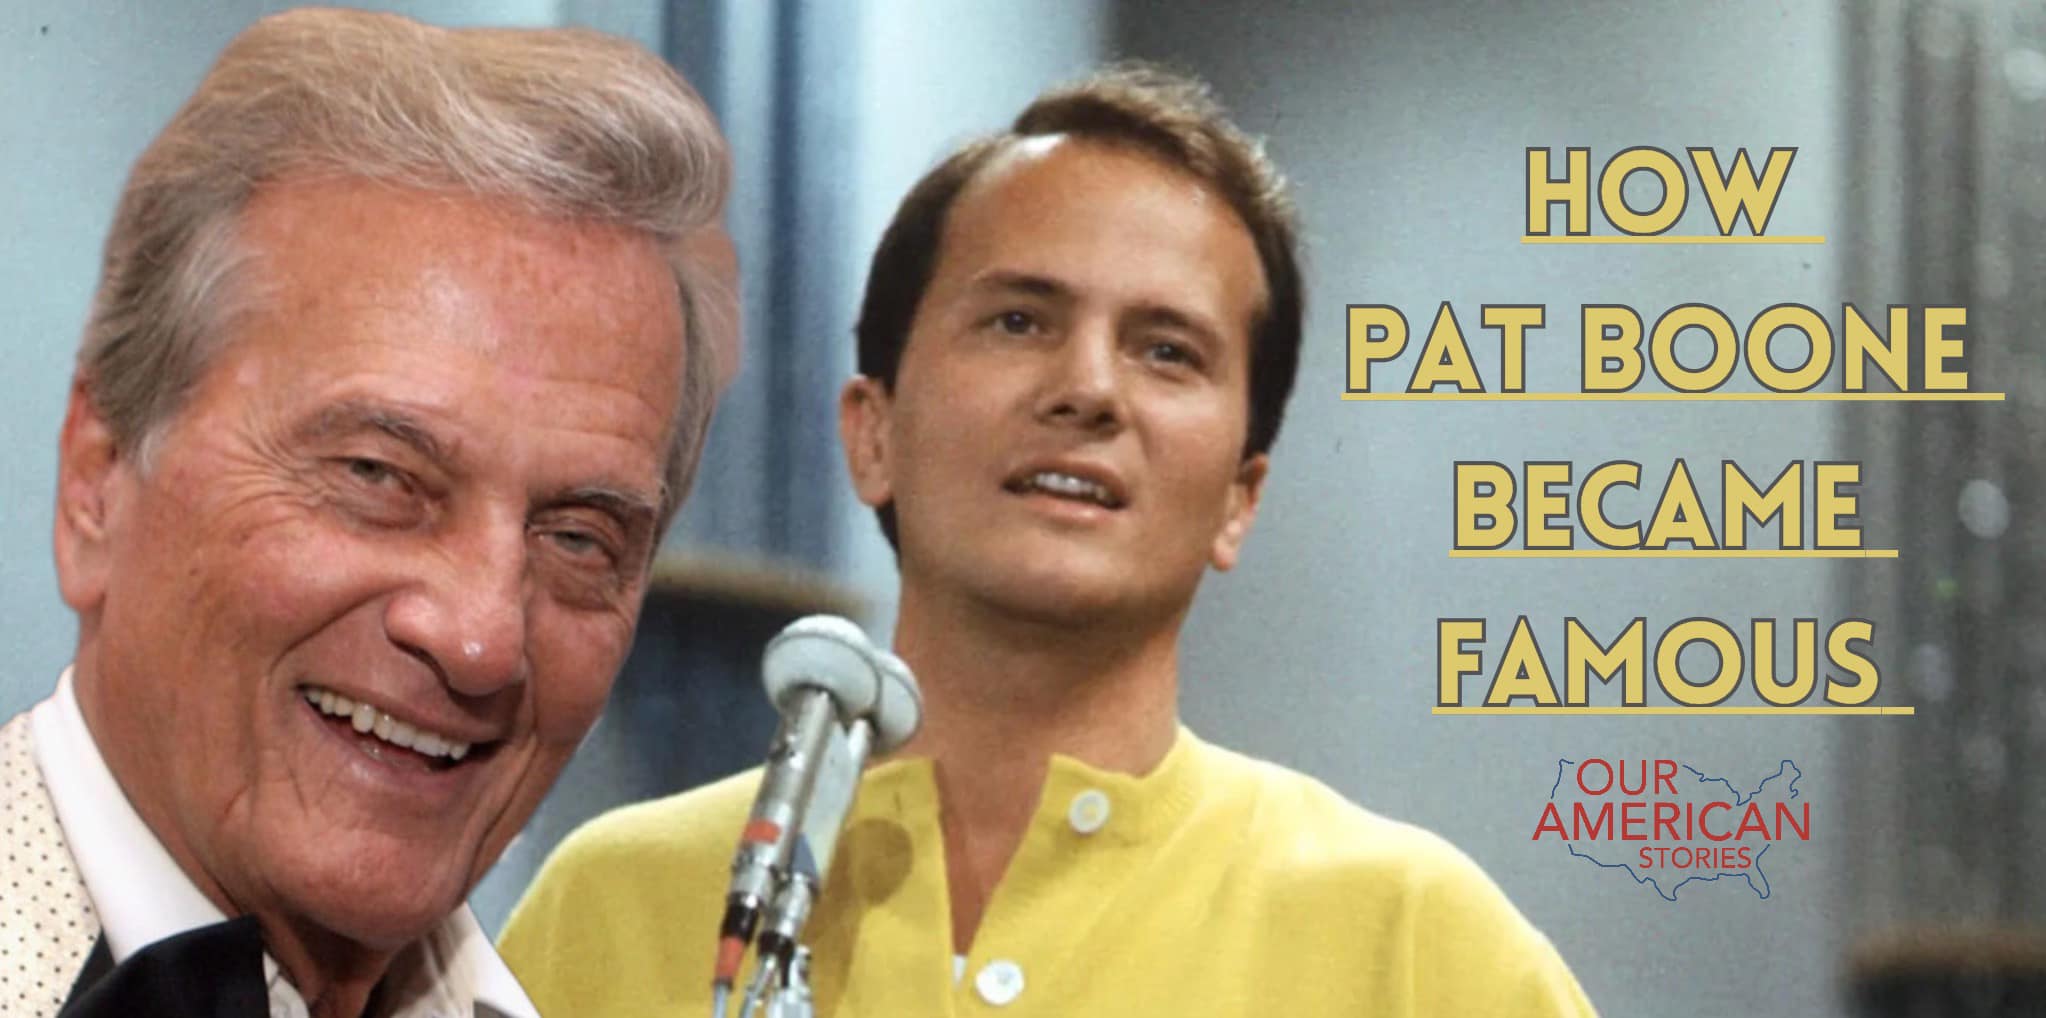 How Pat Boone Became Famous